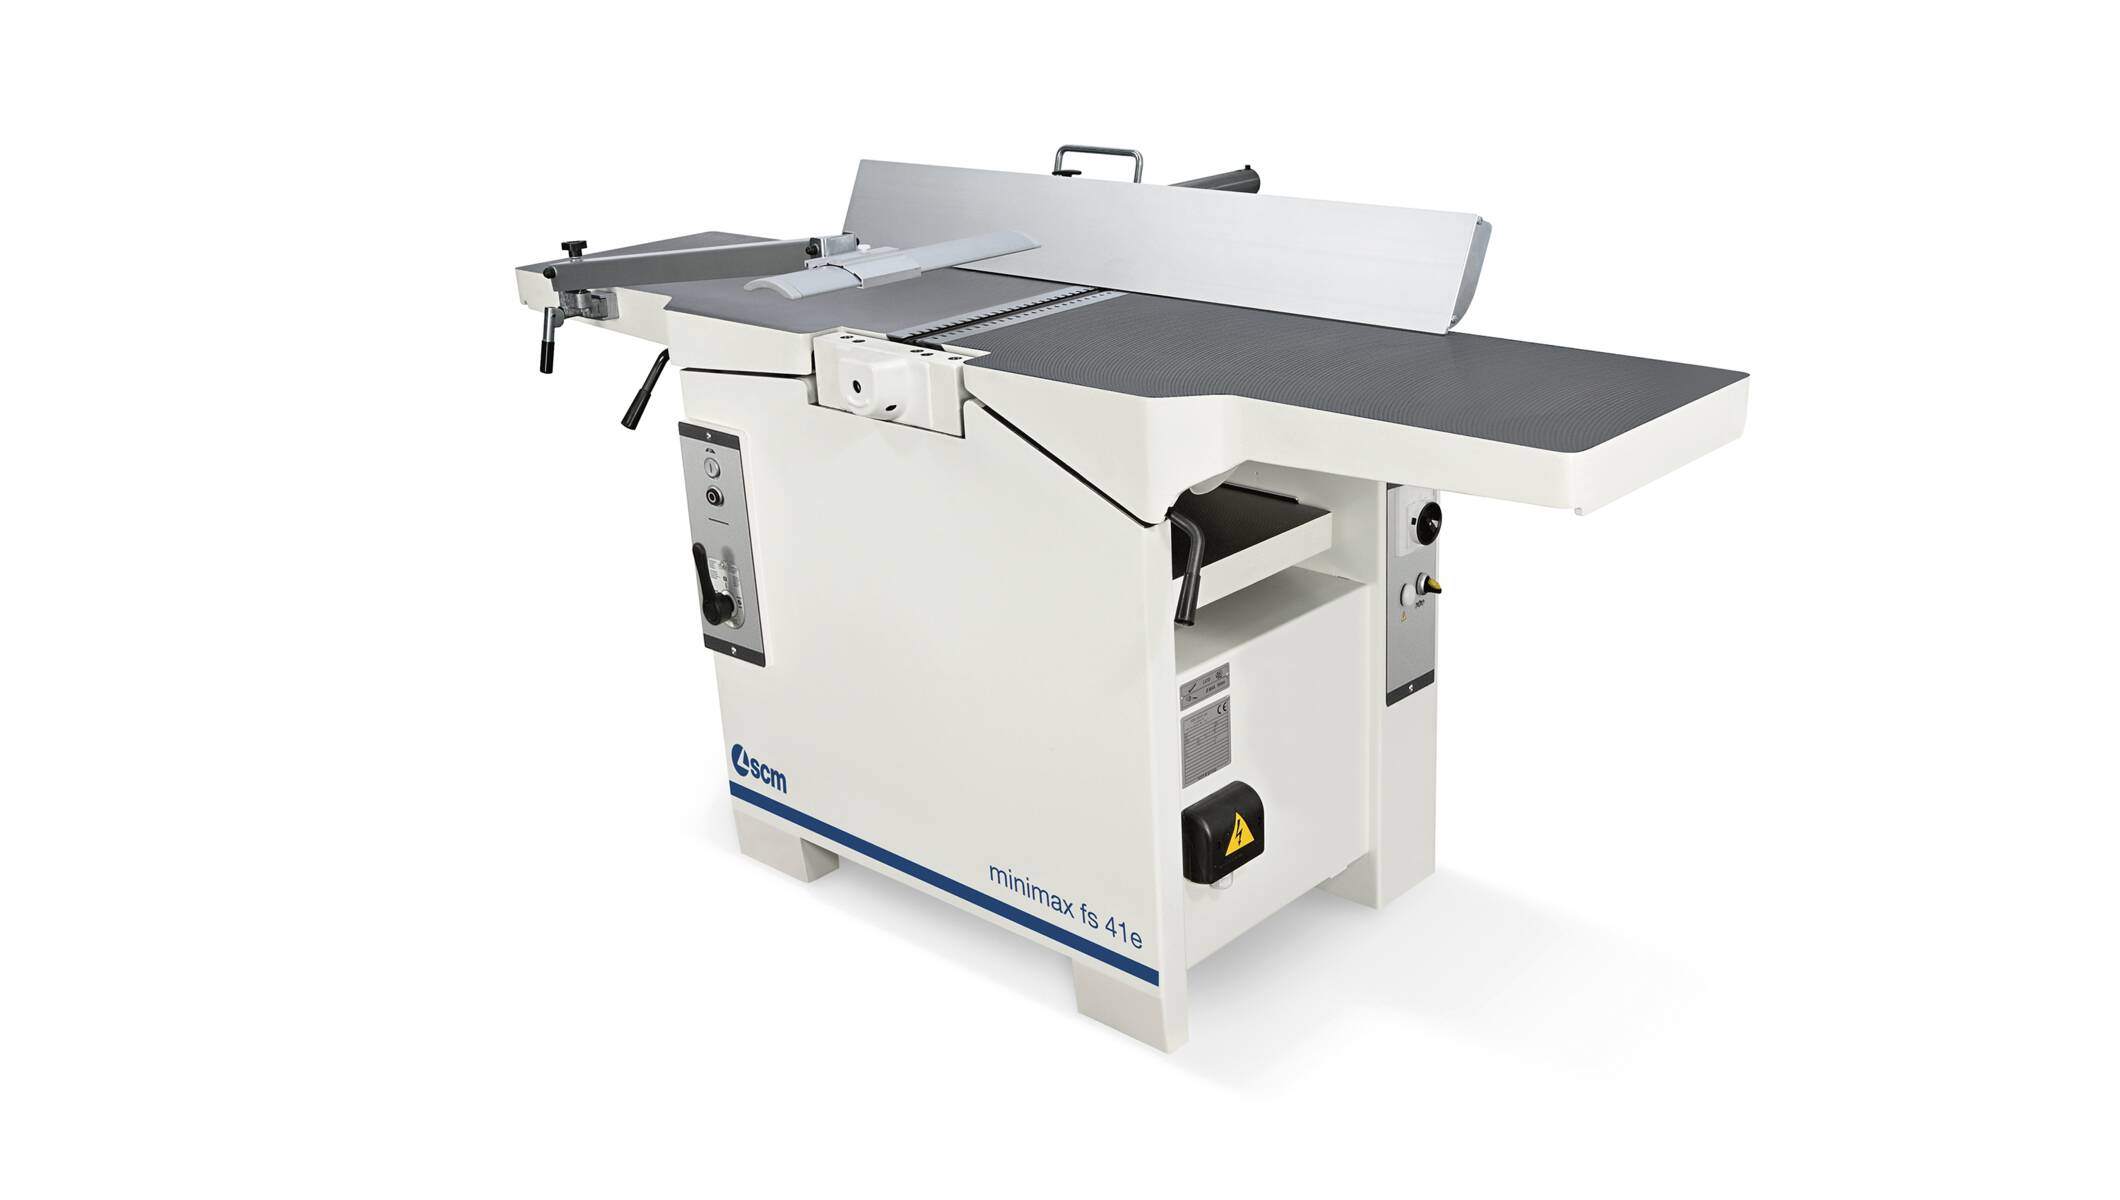 Joinery machines - Jointer/Planer Combination - minimax fs 41e